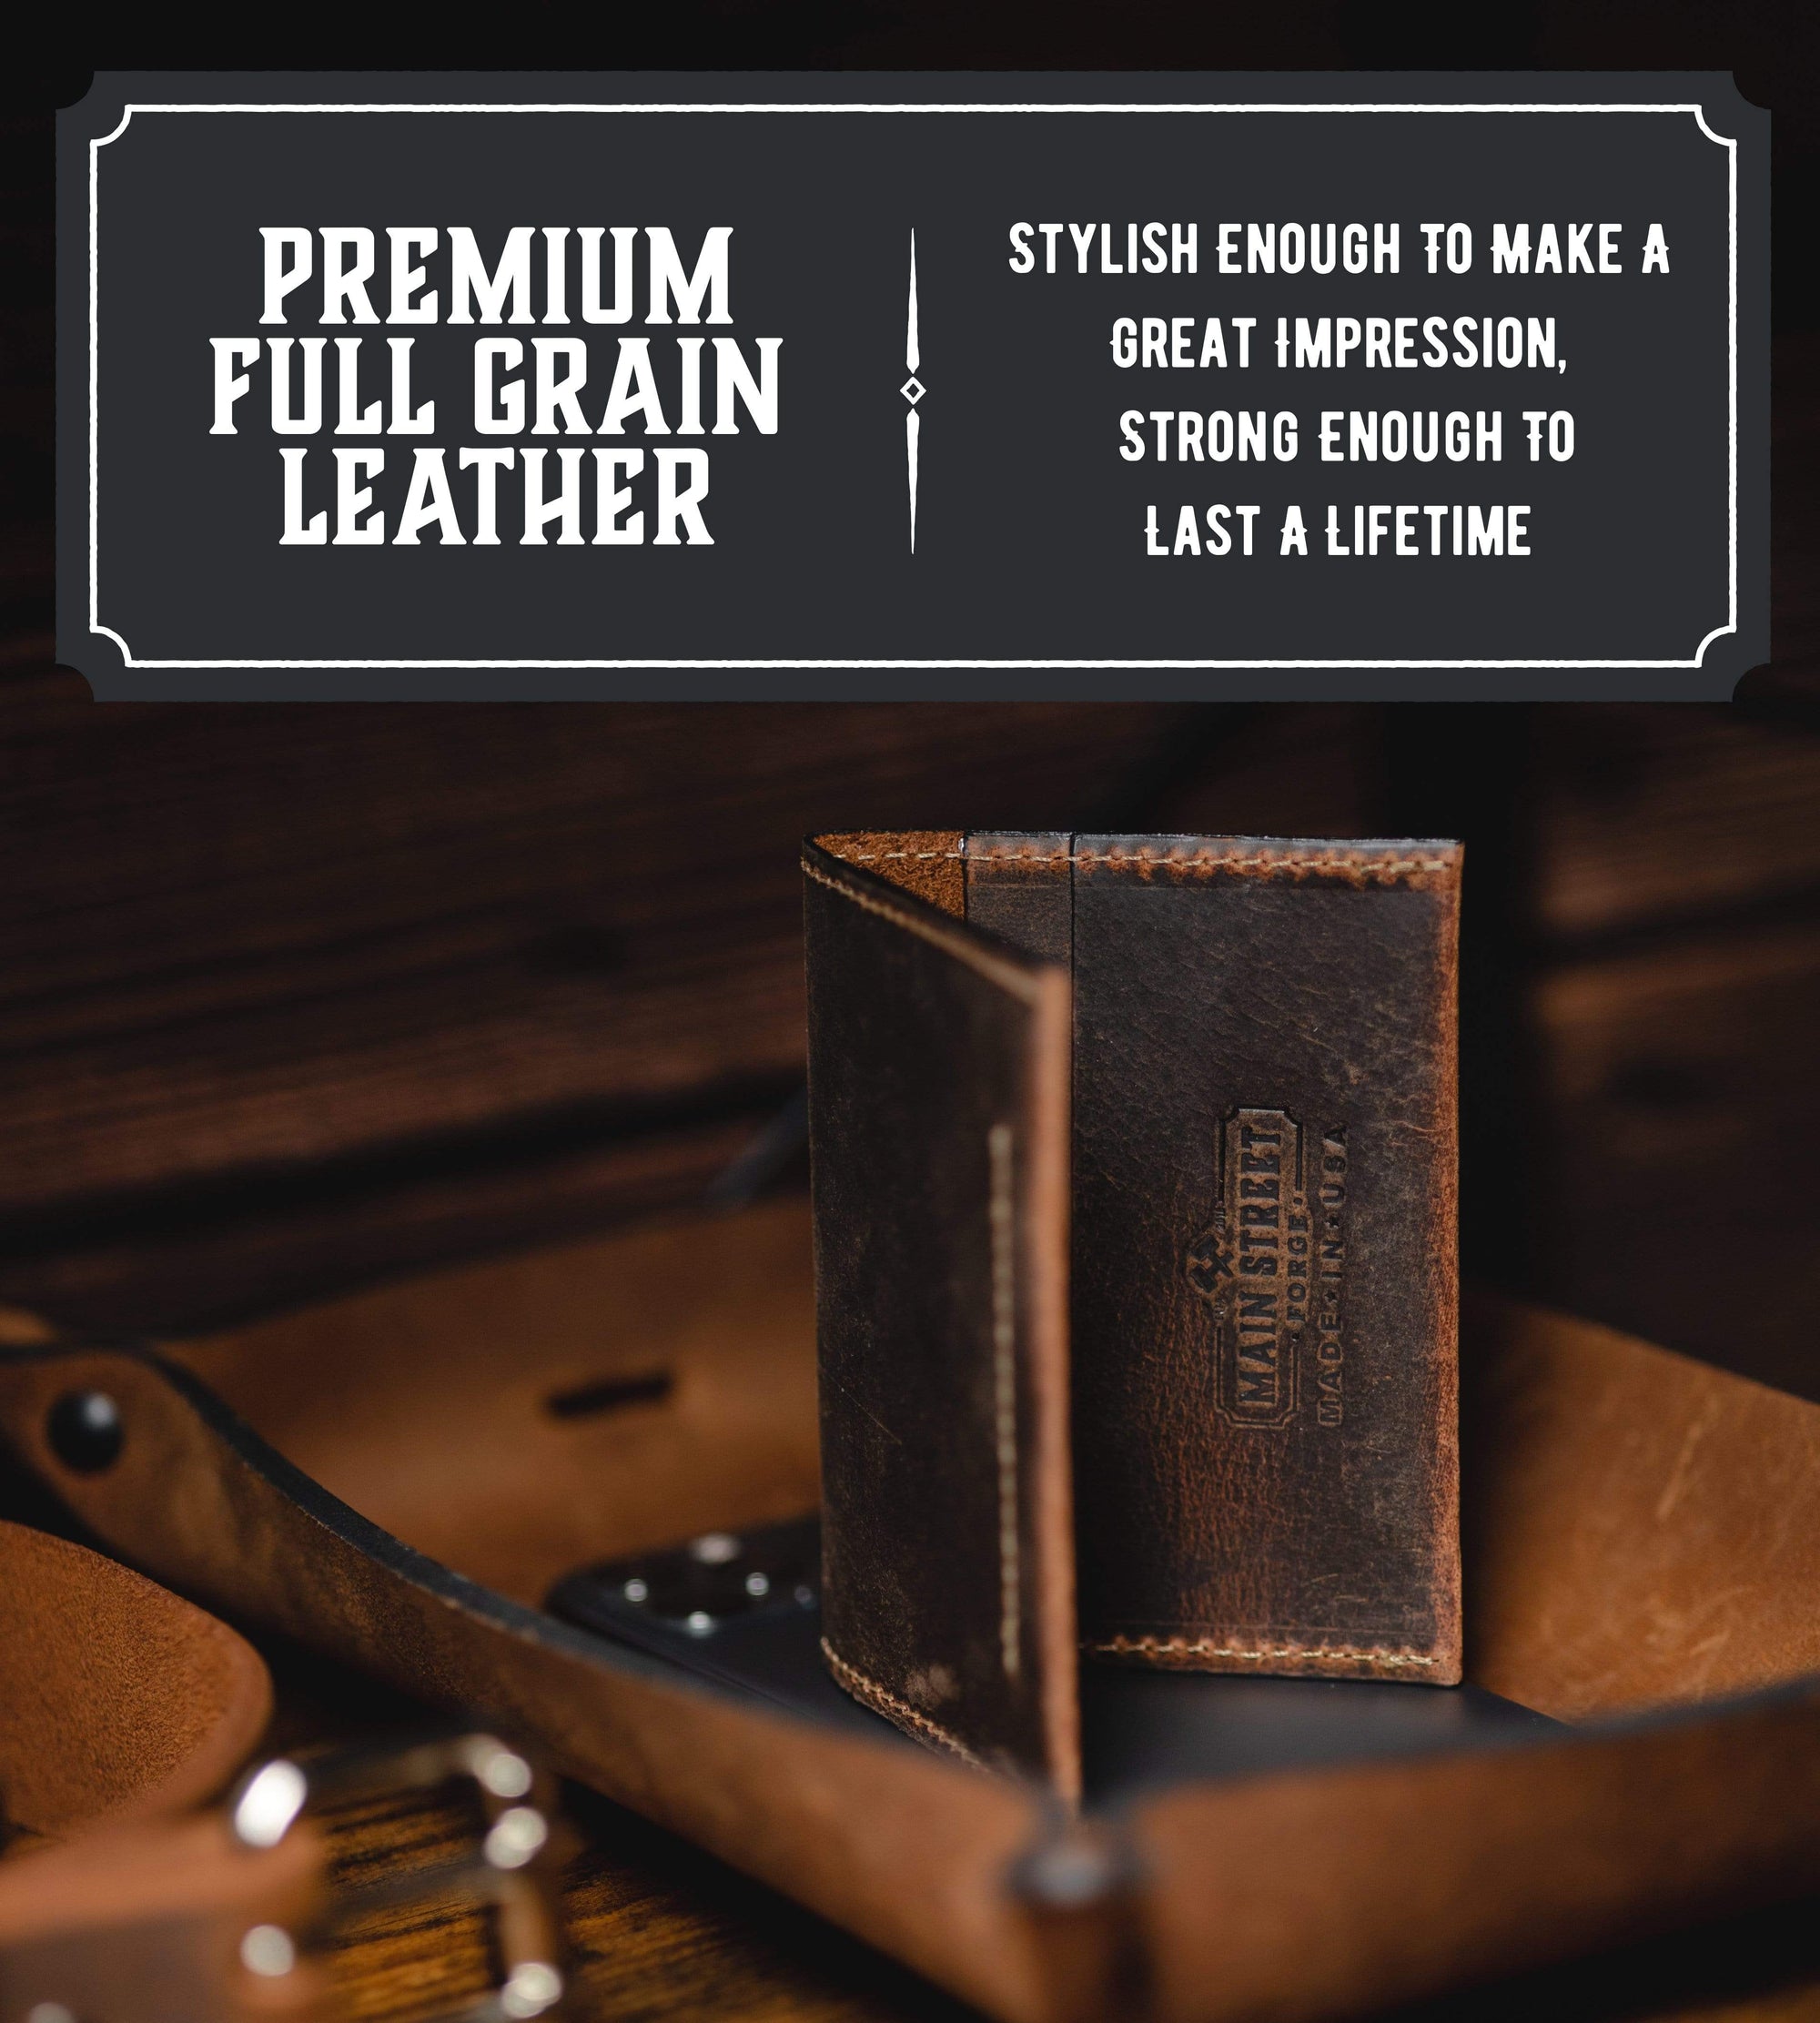 Men's Business Card Holder Wallet at a Great Price.